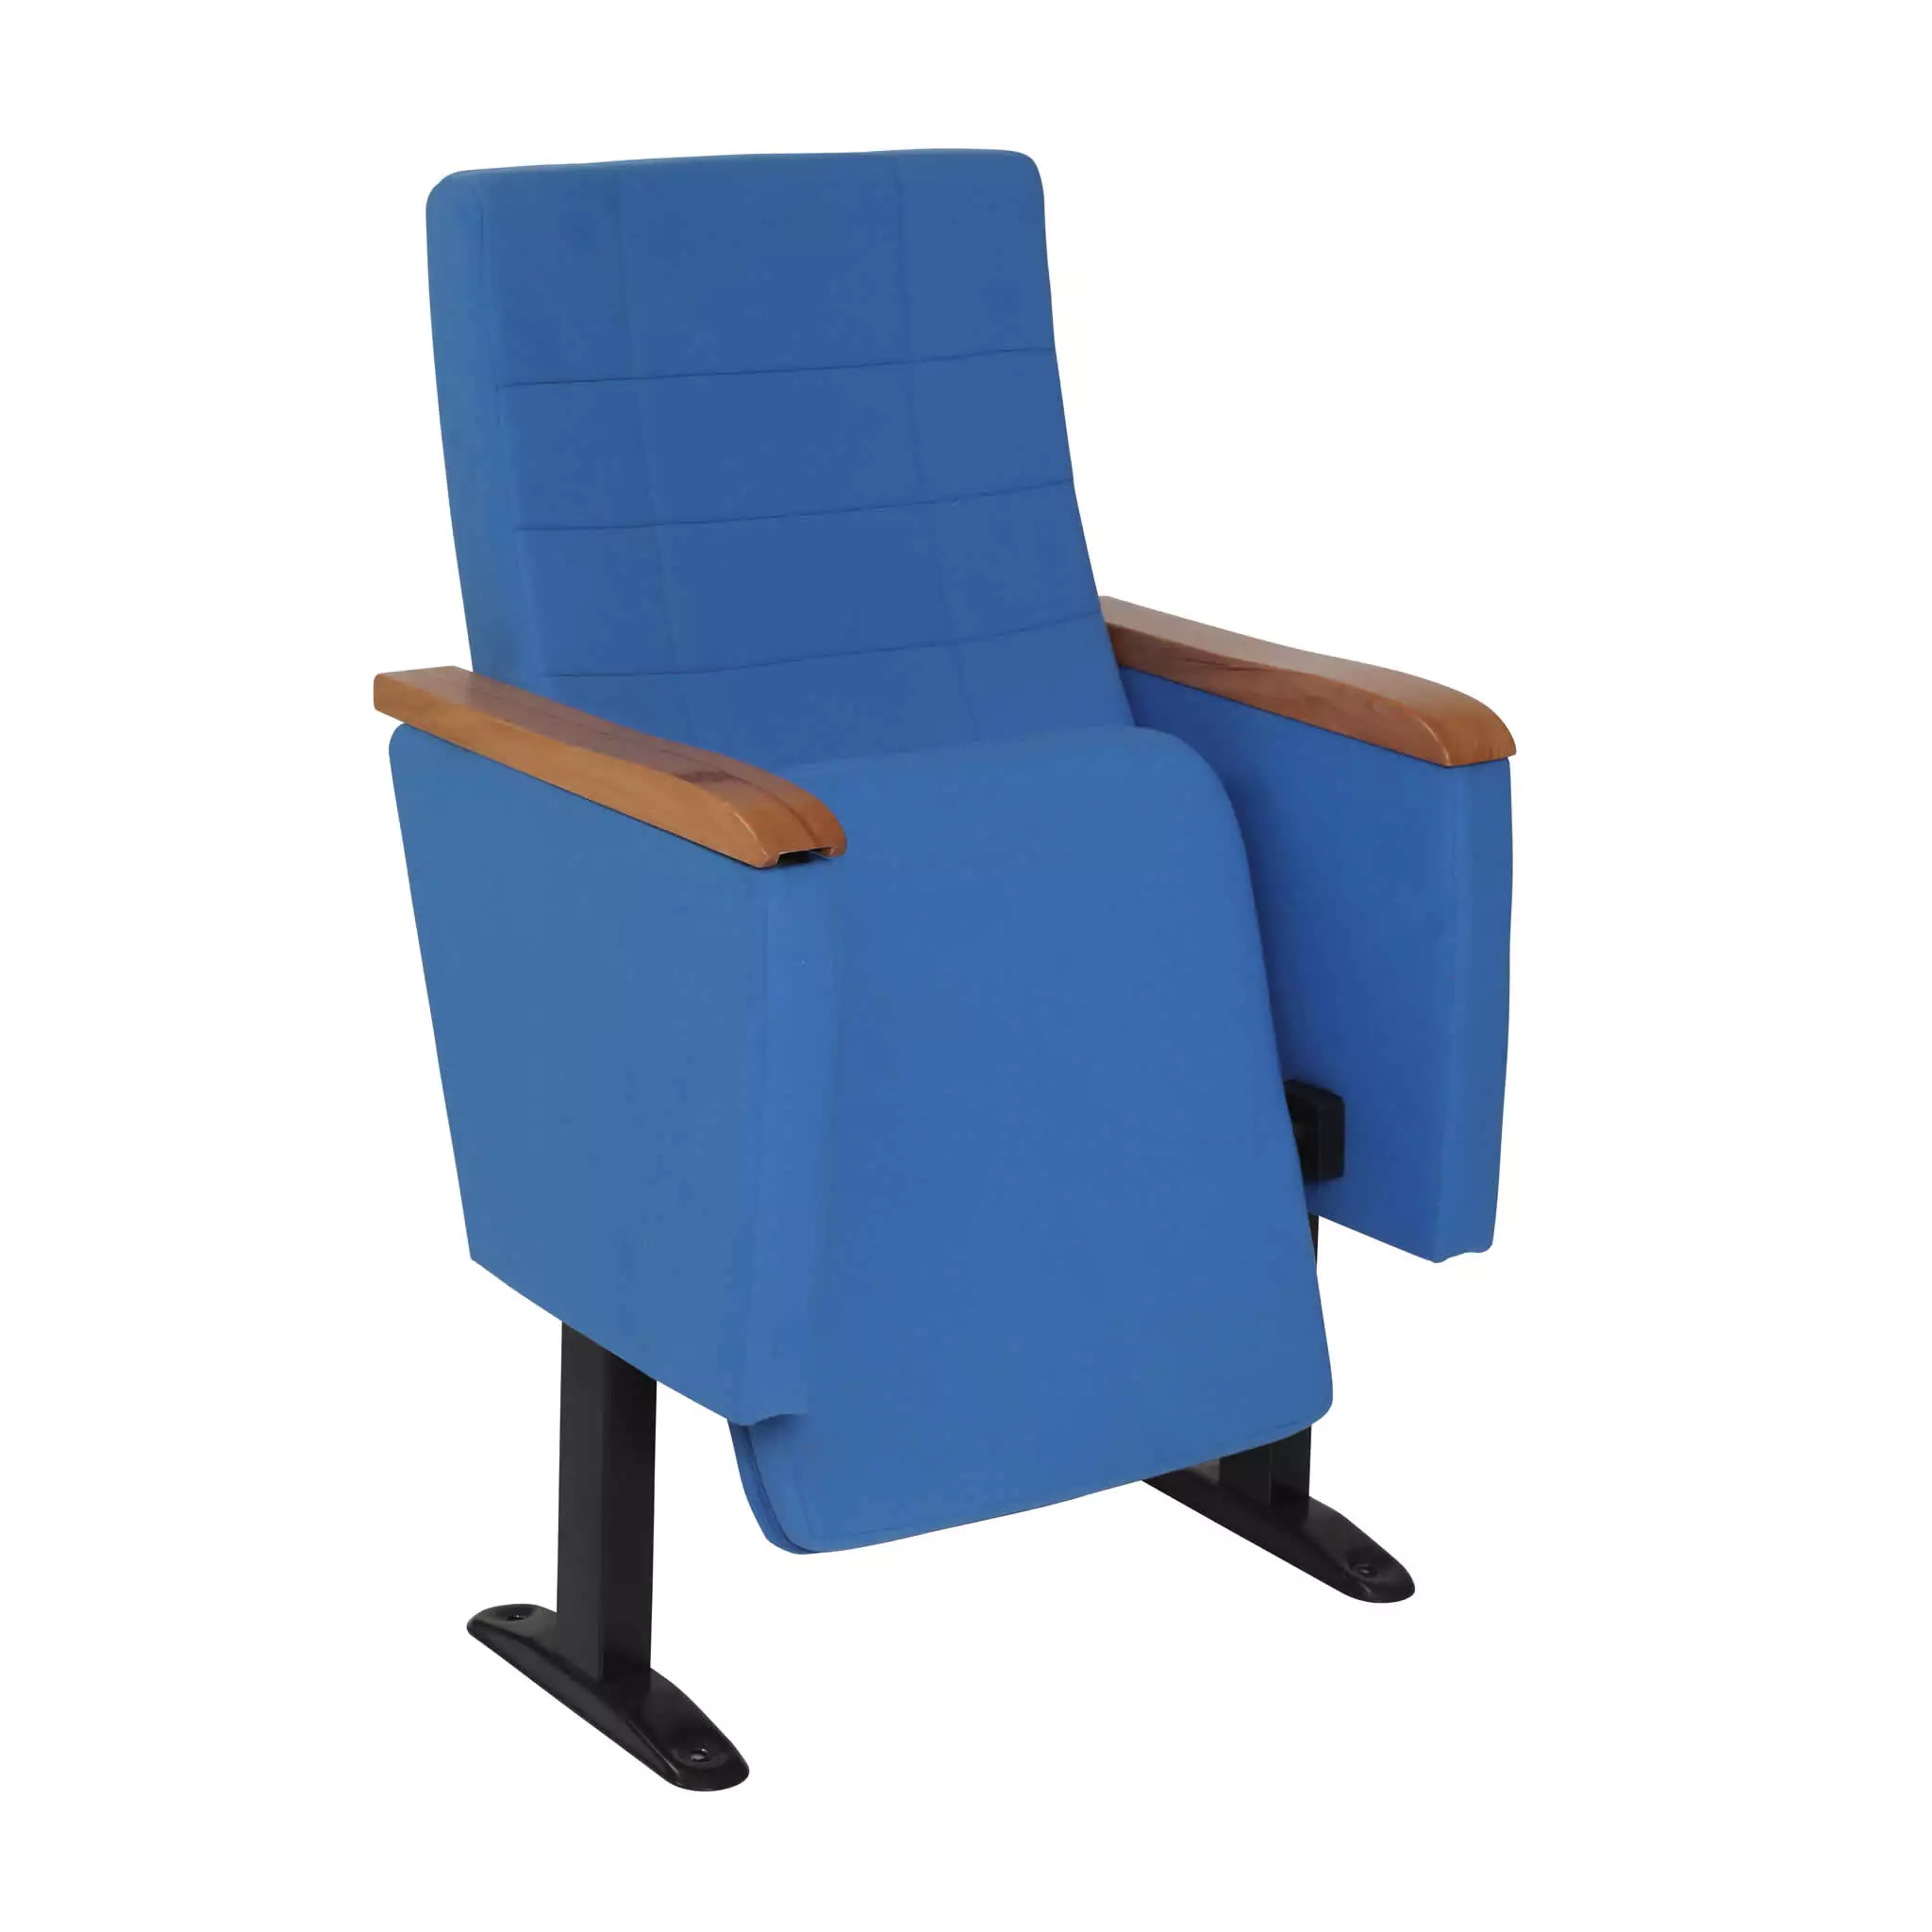 Simko Seating Product Conference Seat Safir S 03